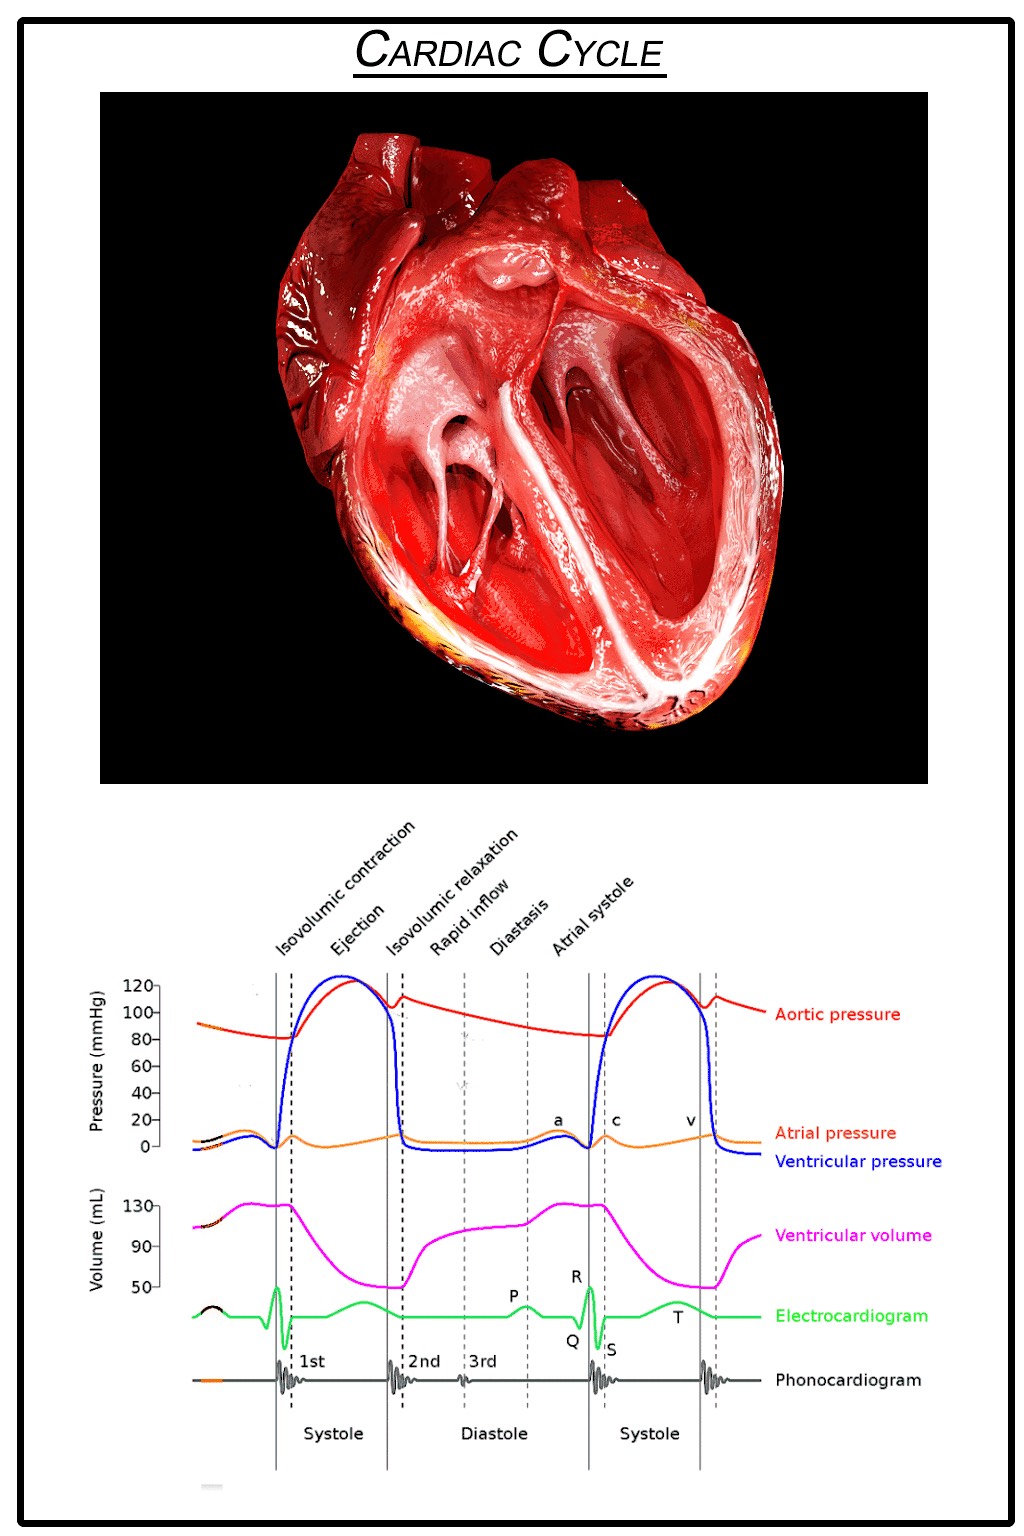 Representational art of heart anatomy above a graph showing blood pressure and volume of the heart